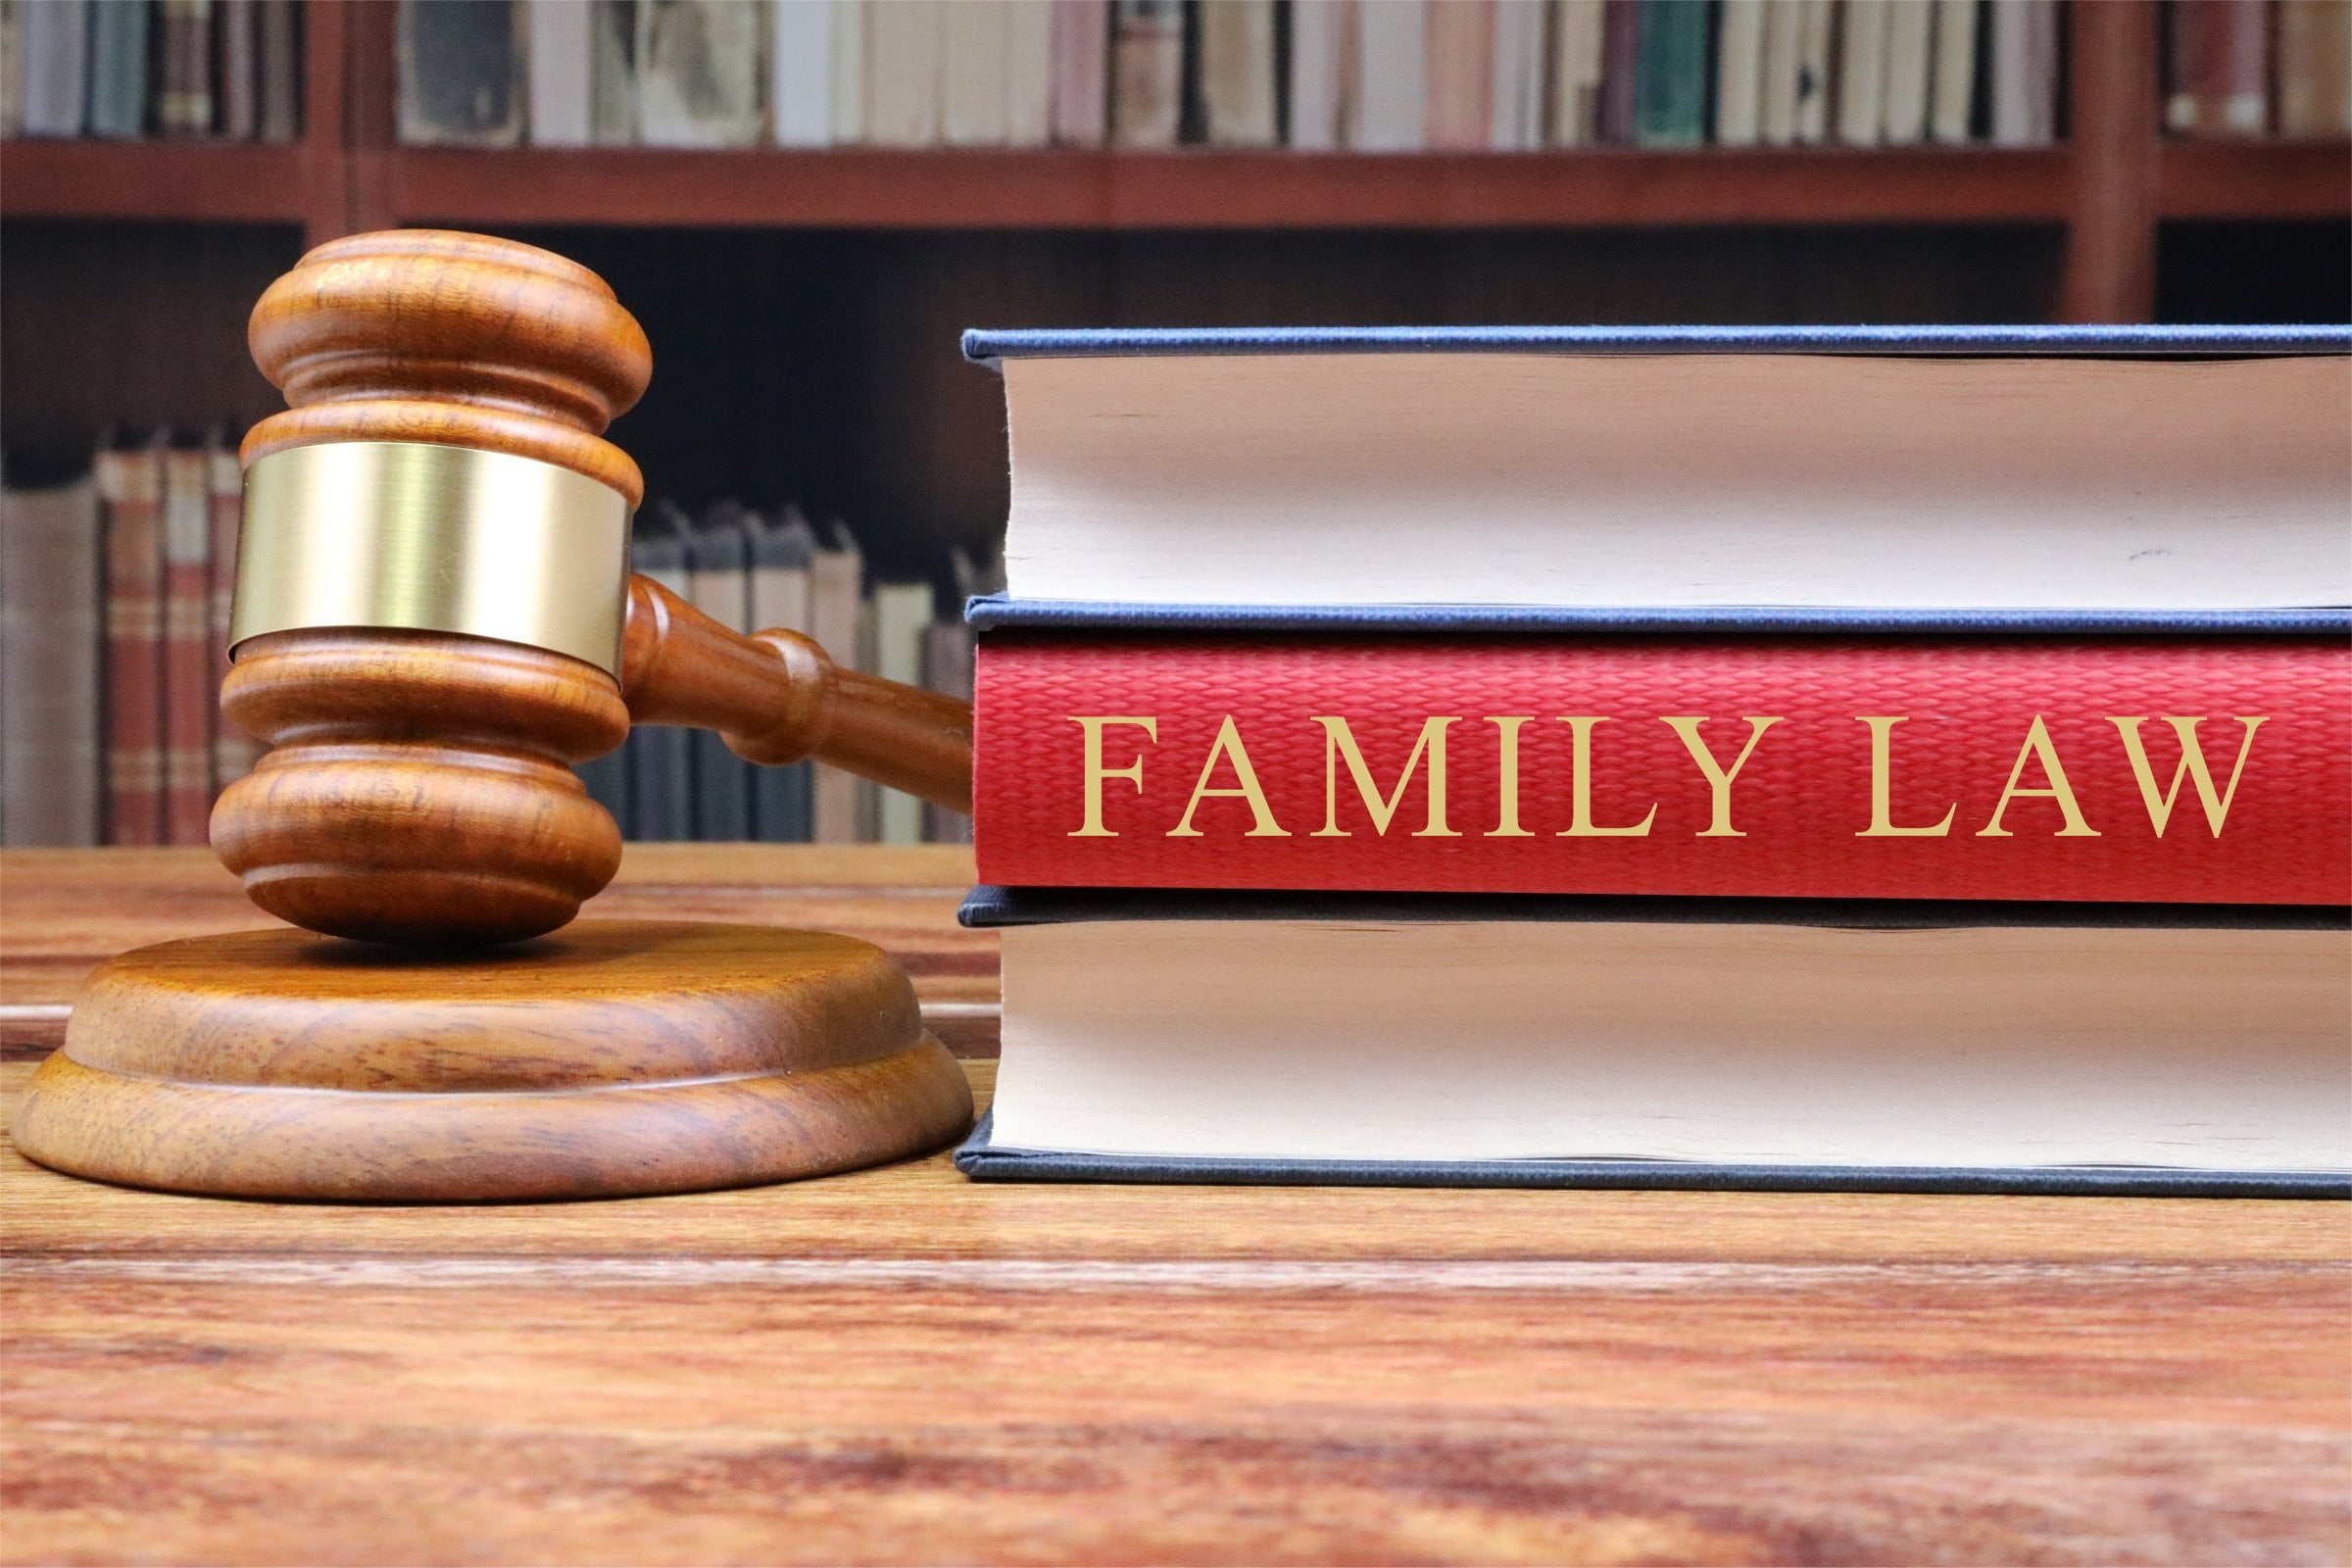 family law legal advice online